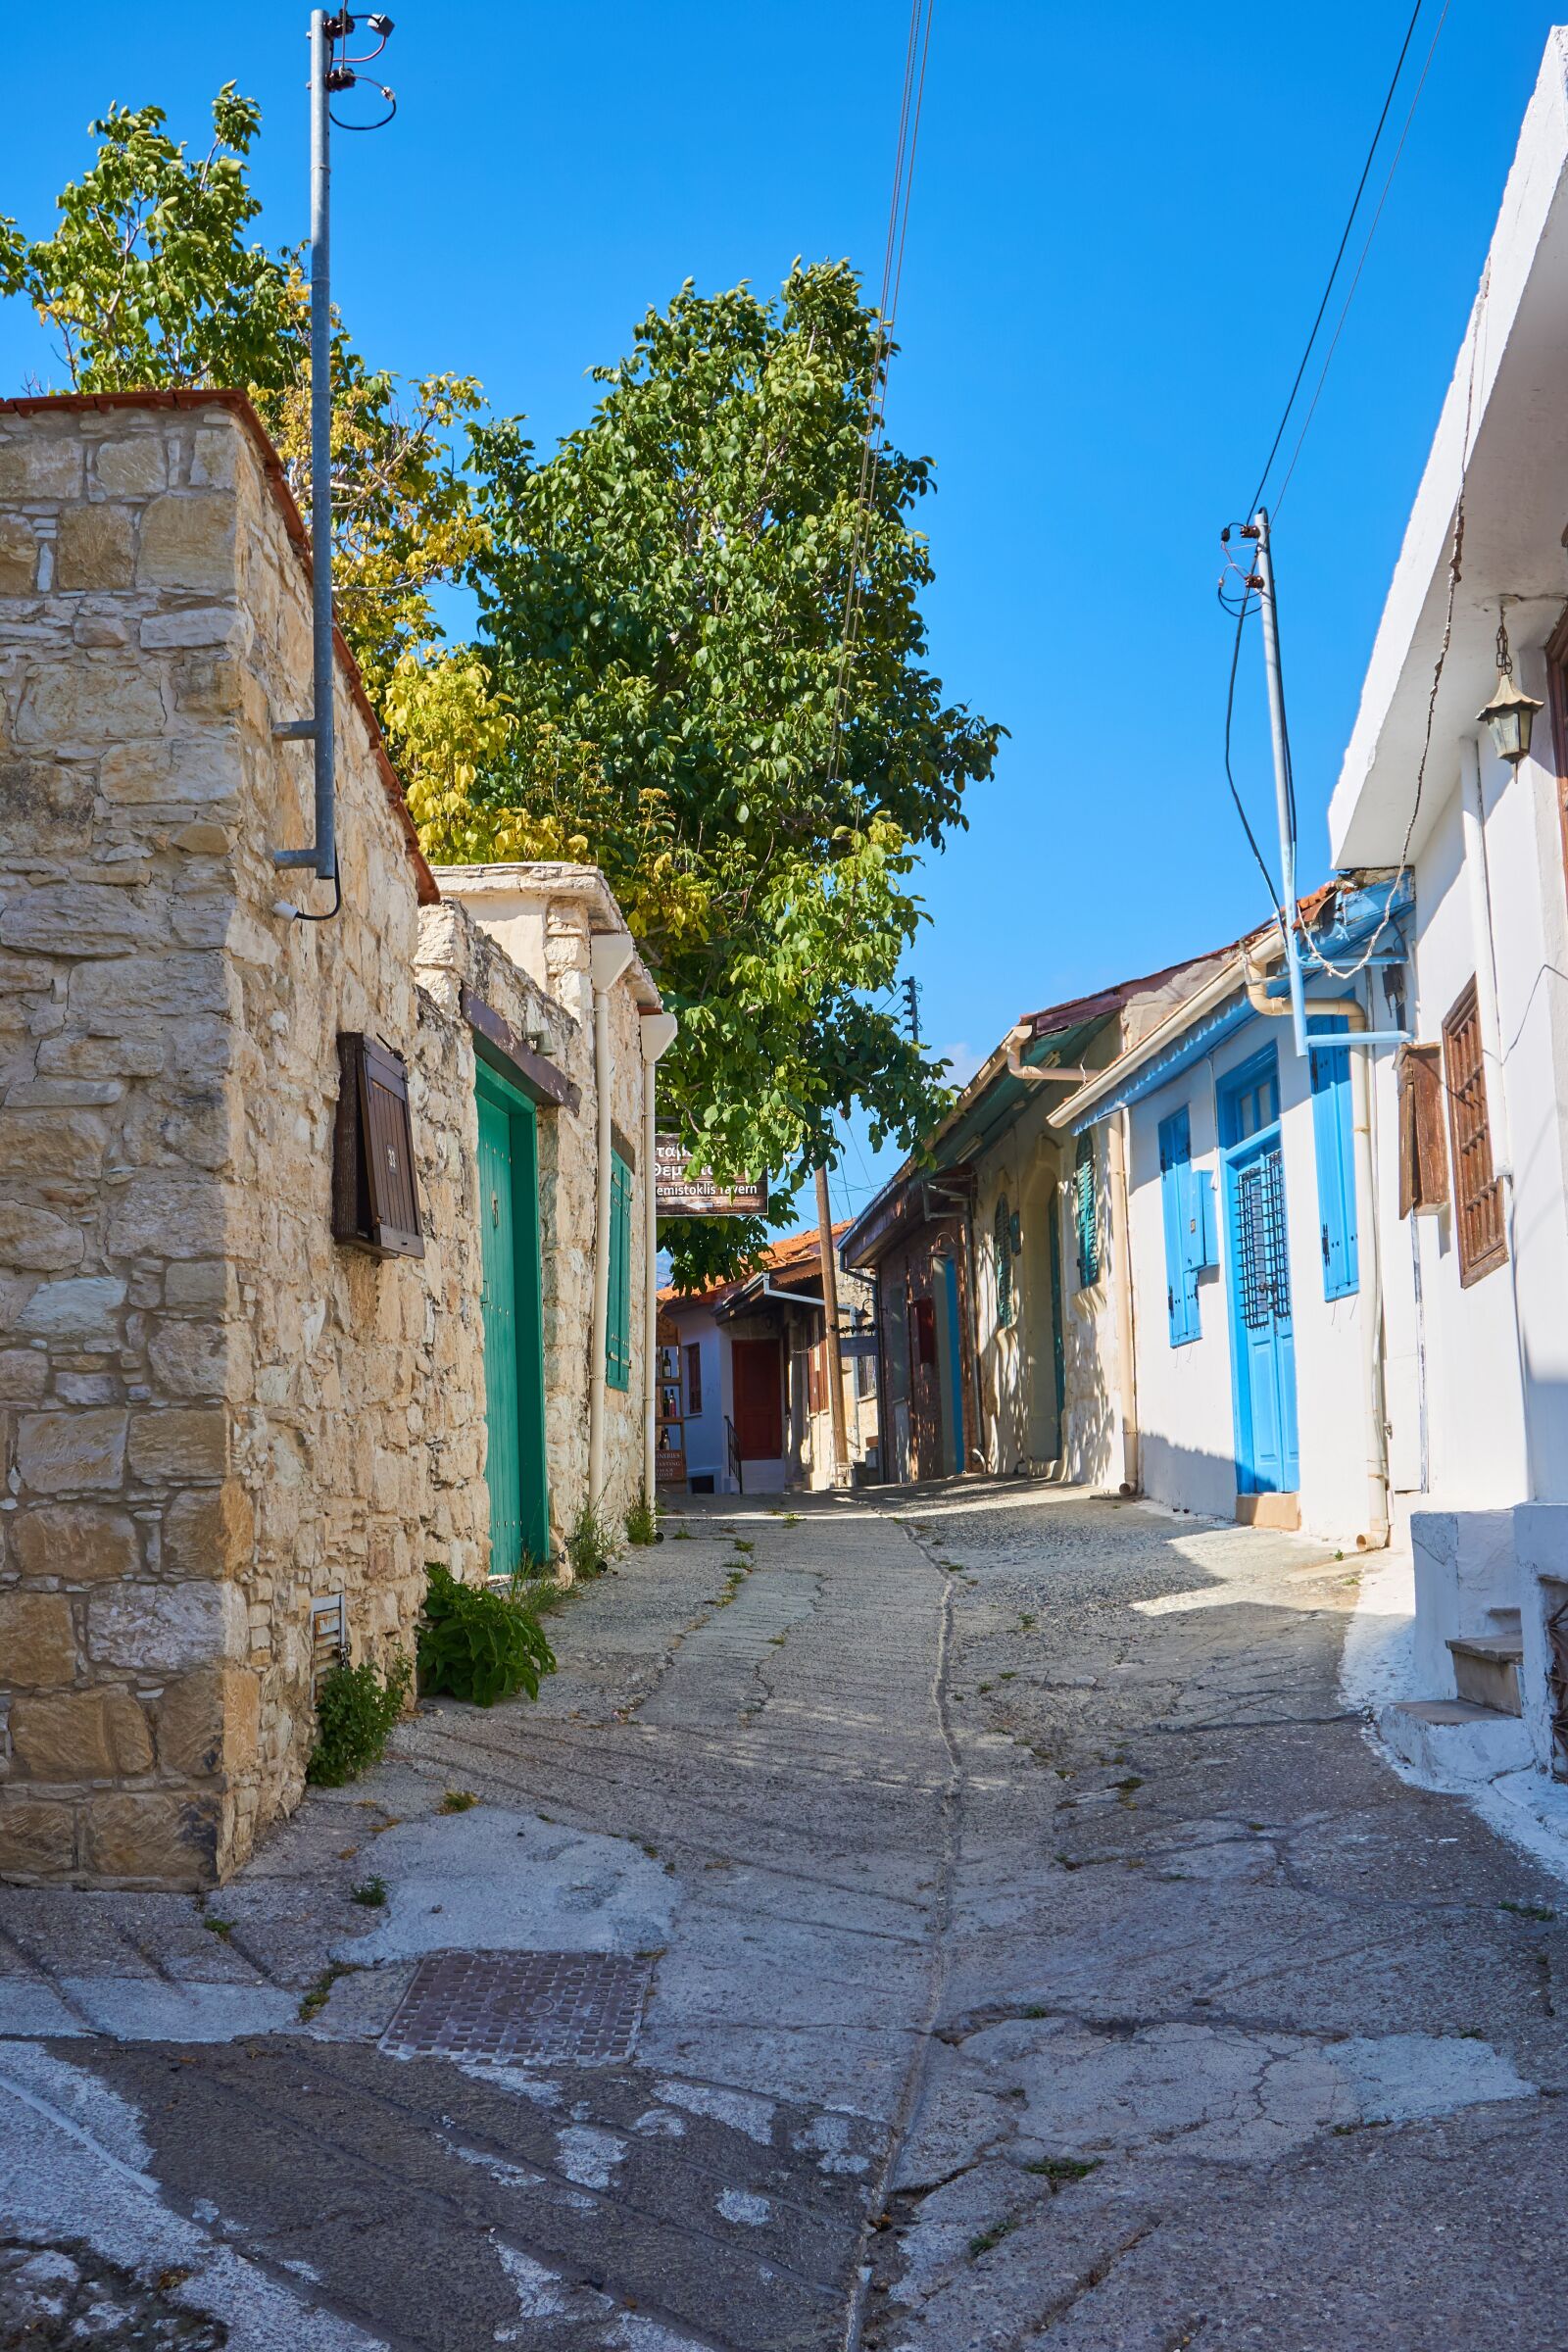 Sony a6000 sample photo. Cyprus, village, alley photography